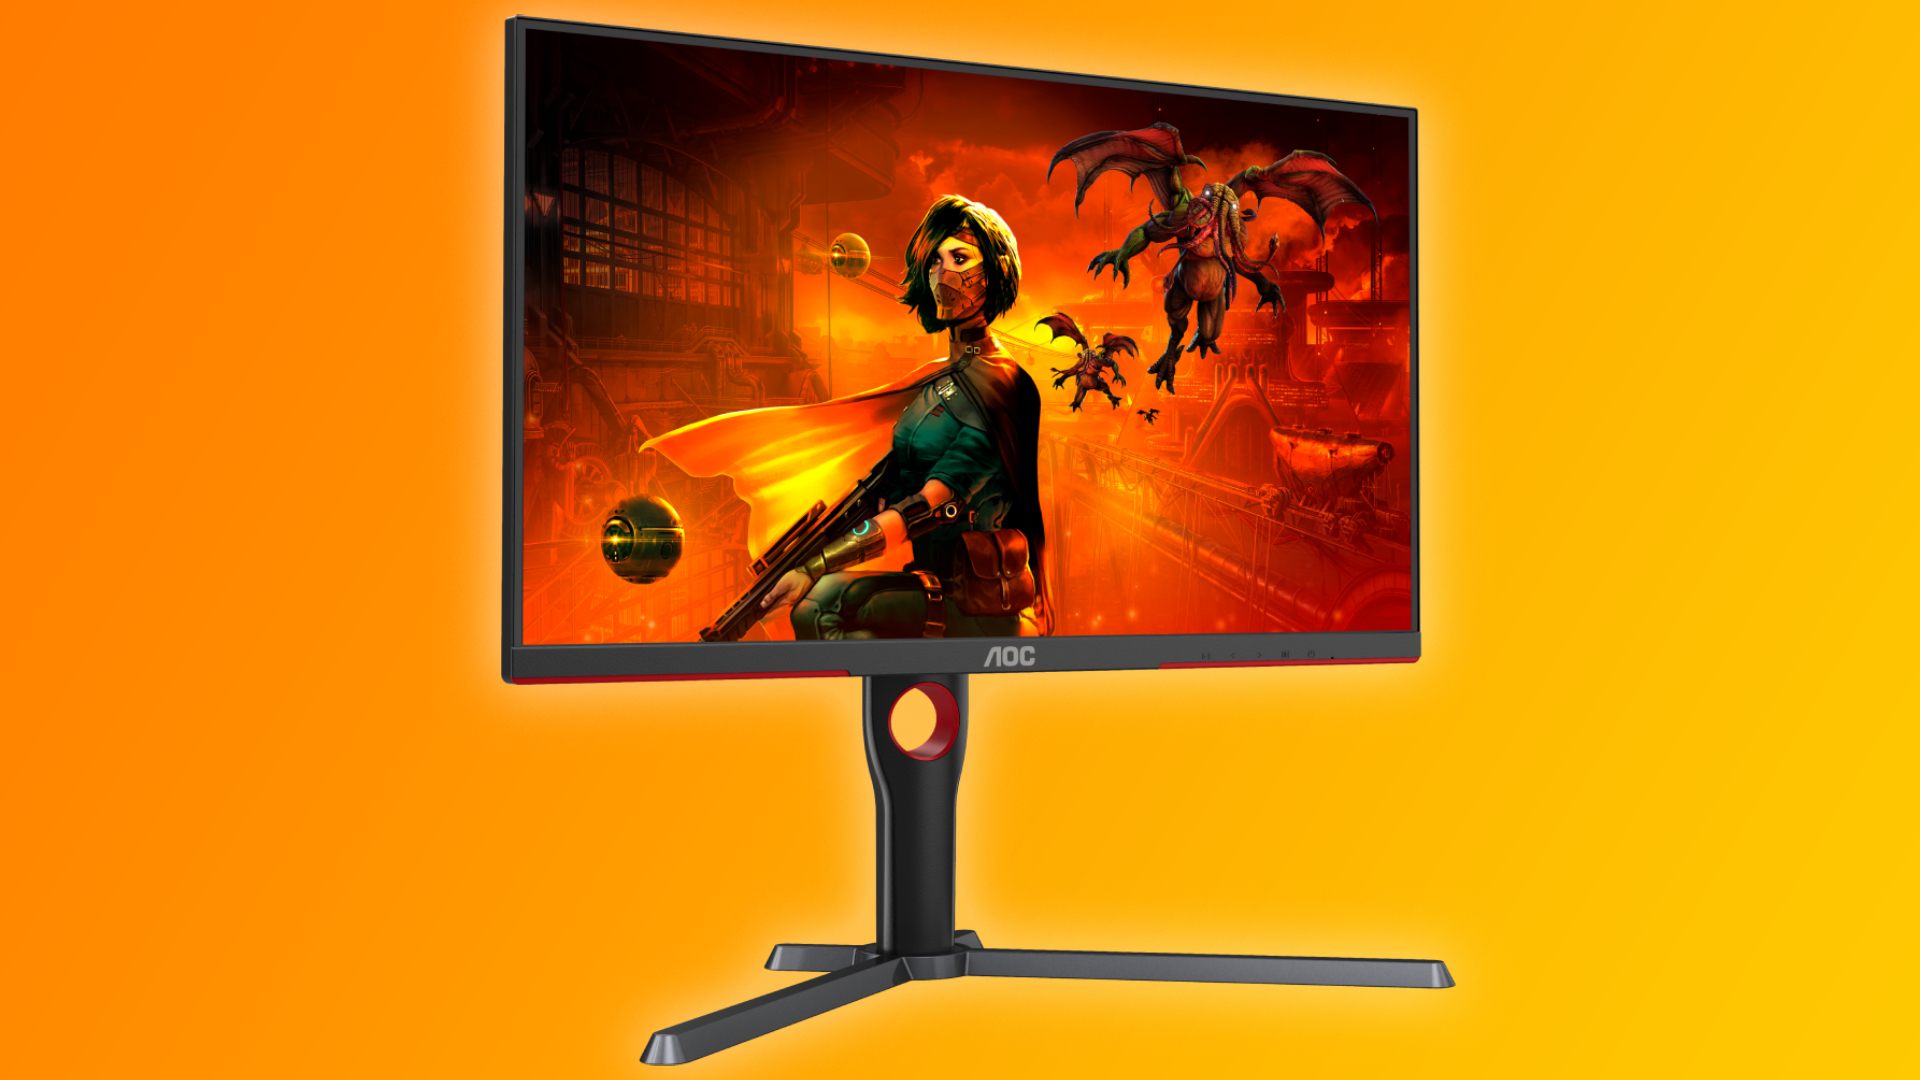 AOC 24G2 Review 2024: The Best Budget 144Hz Gaming Monitor